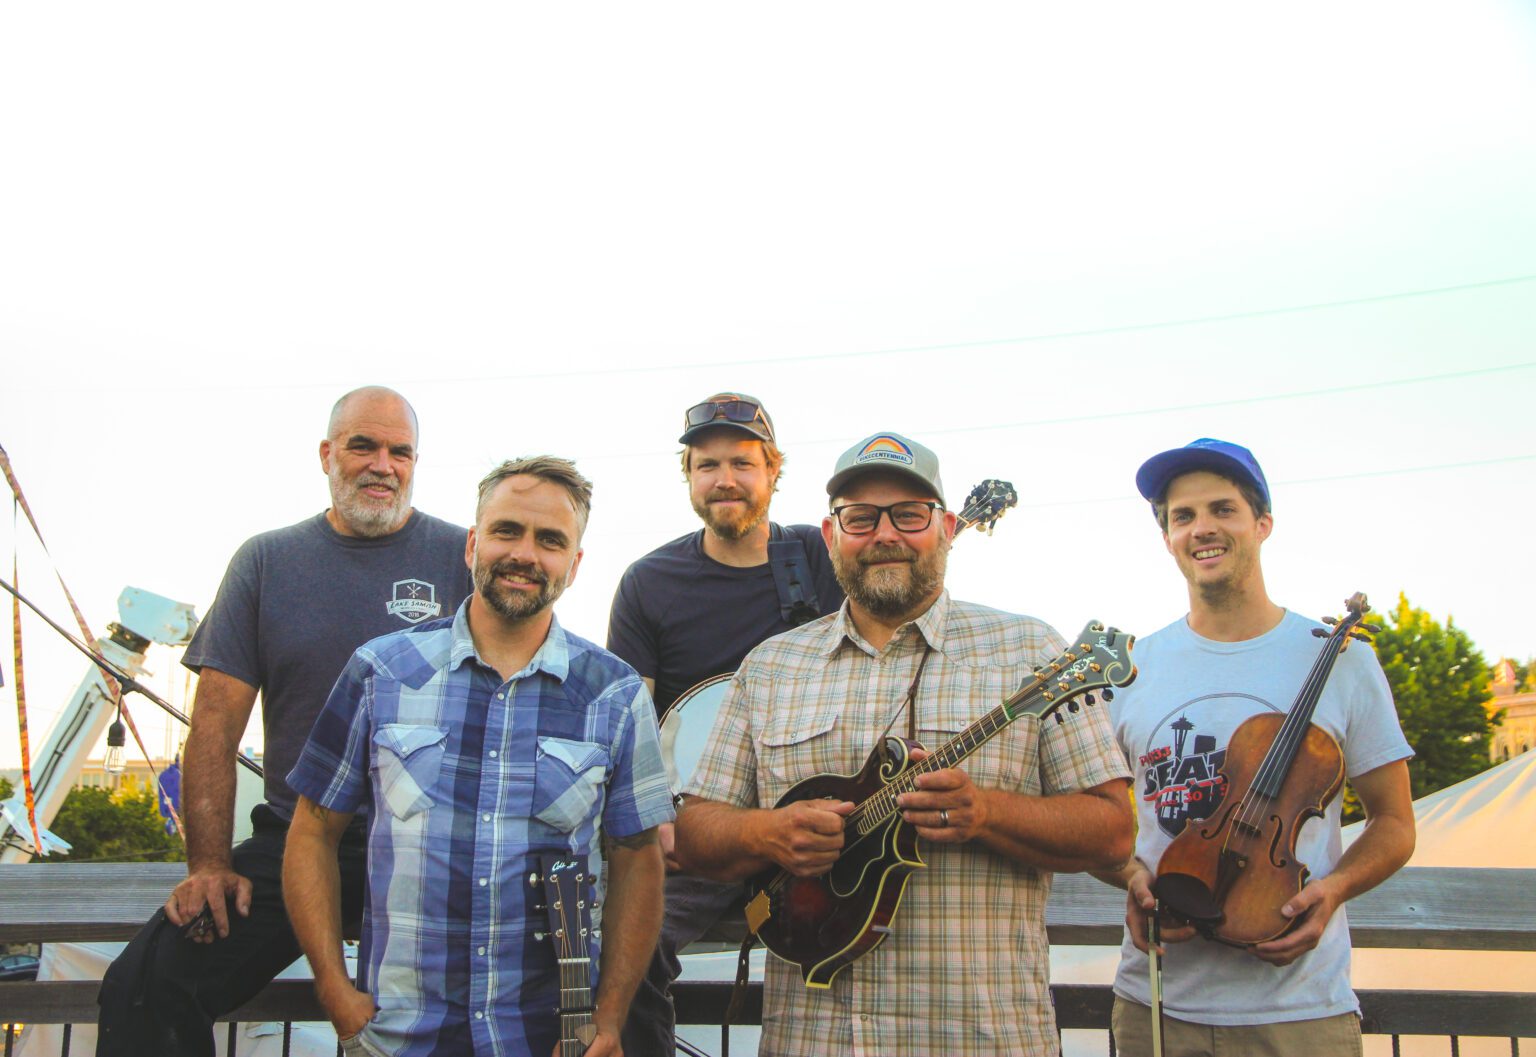 Make your way to Stones Throw Brewery on Dec. 2 to celebrate High Mountain String Band's 10th anniversary. The Bellingham-based band plays a mixture of traditional bluegrass standards